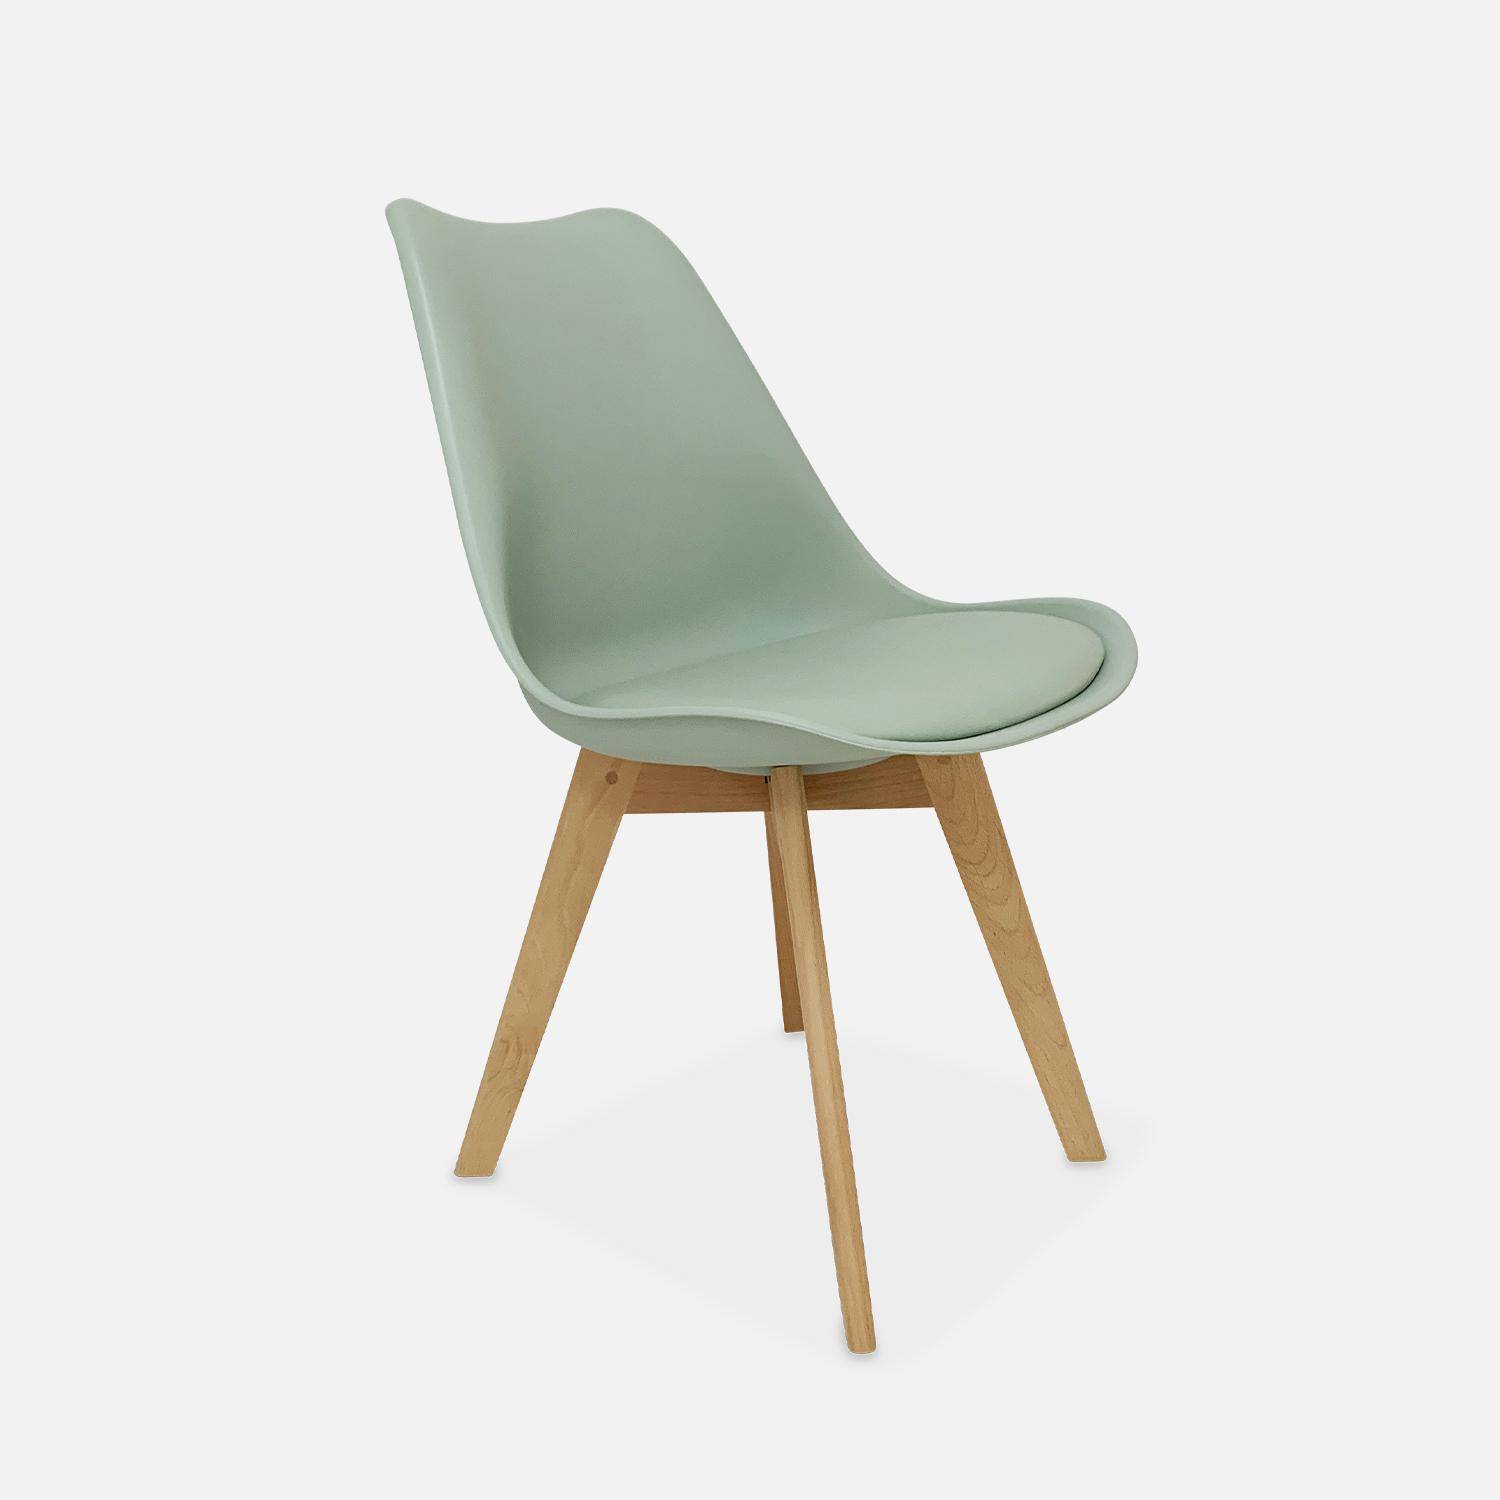 Pair of scandi-style dining chairs, green, L49xD55xH81cm, NILS Photo2